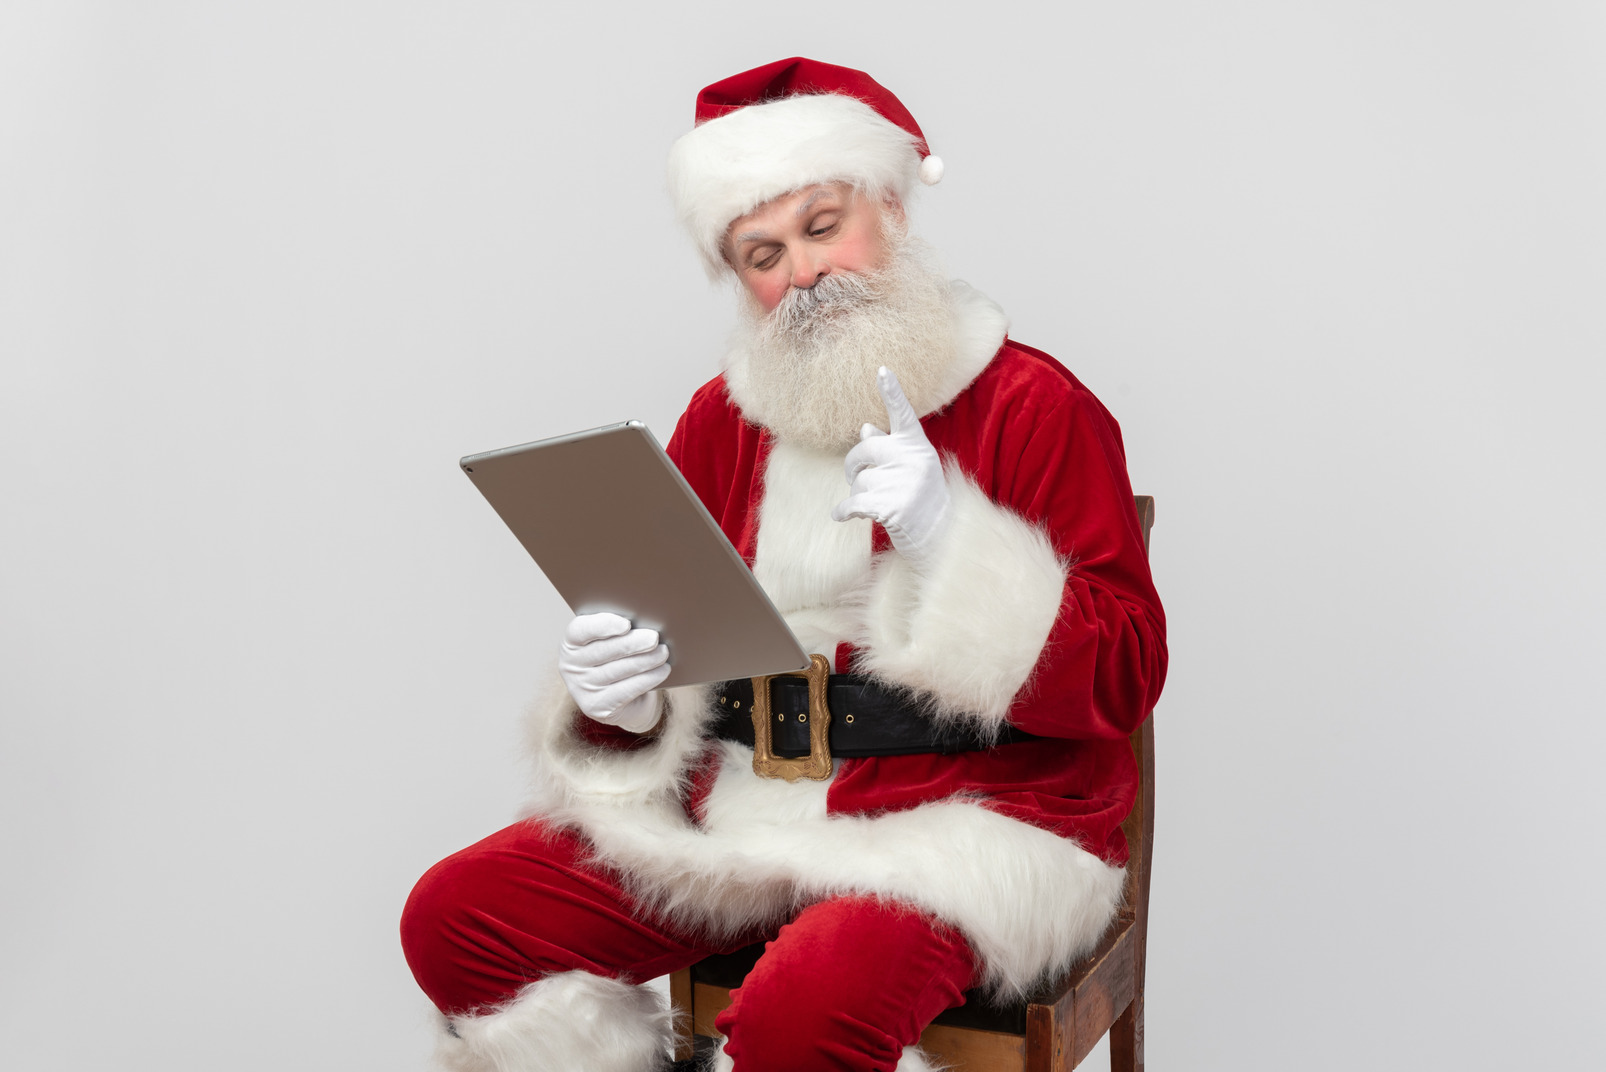 Sants claus reading something from the folder and pointing out